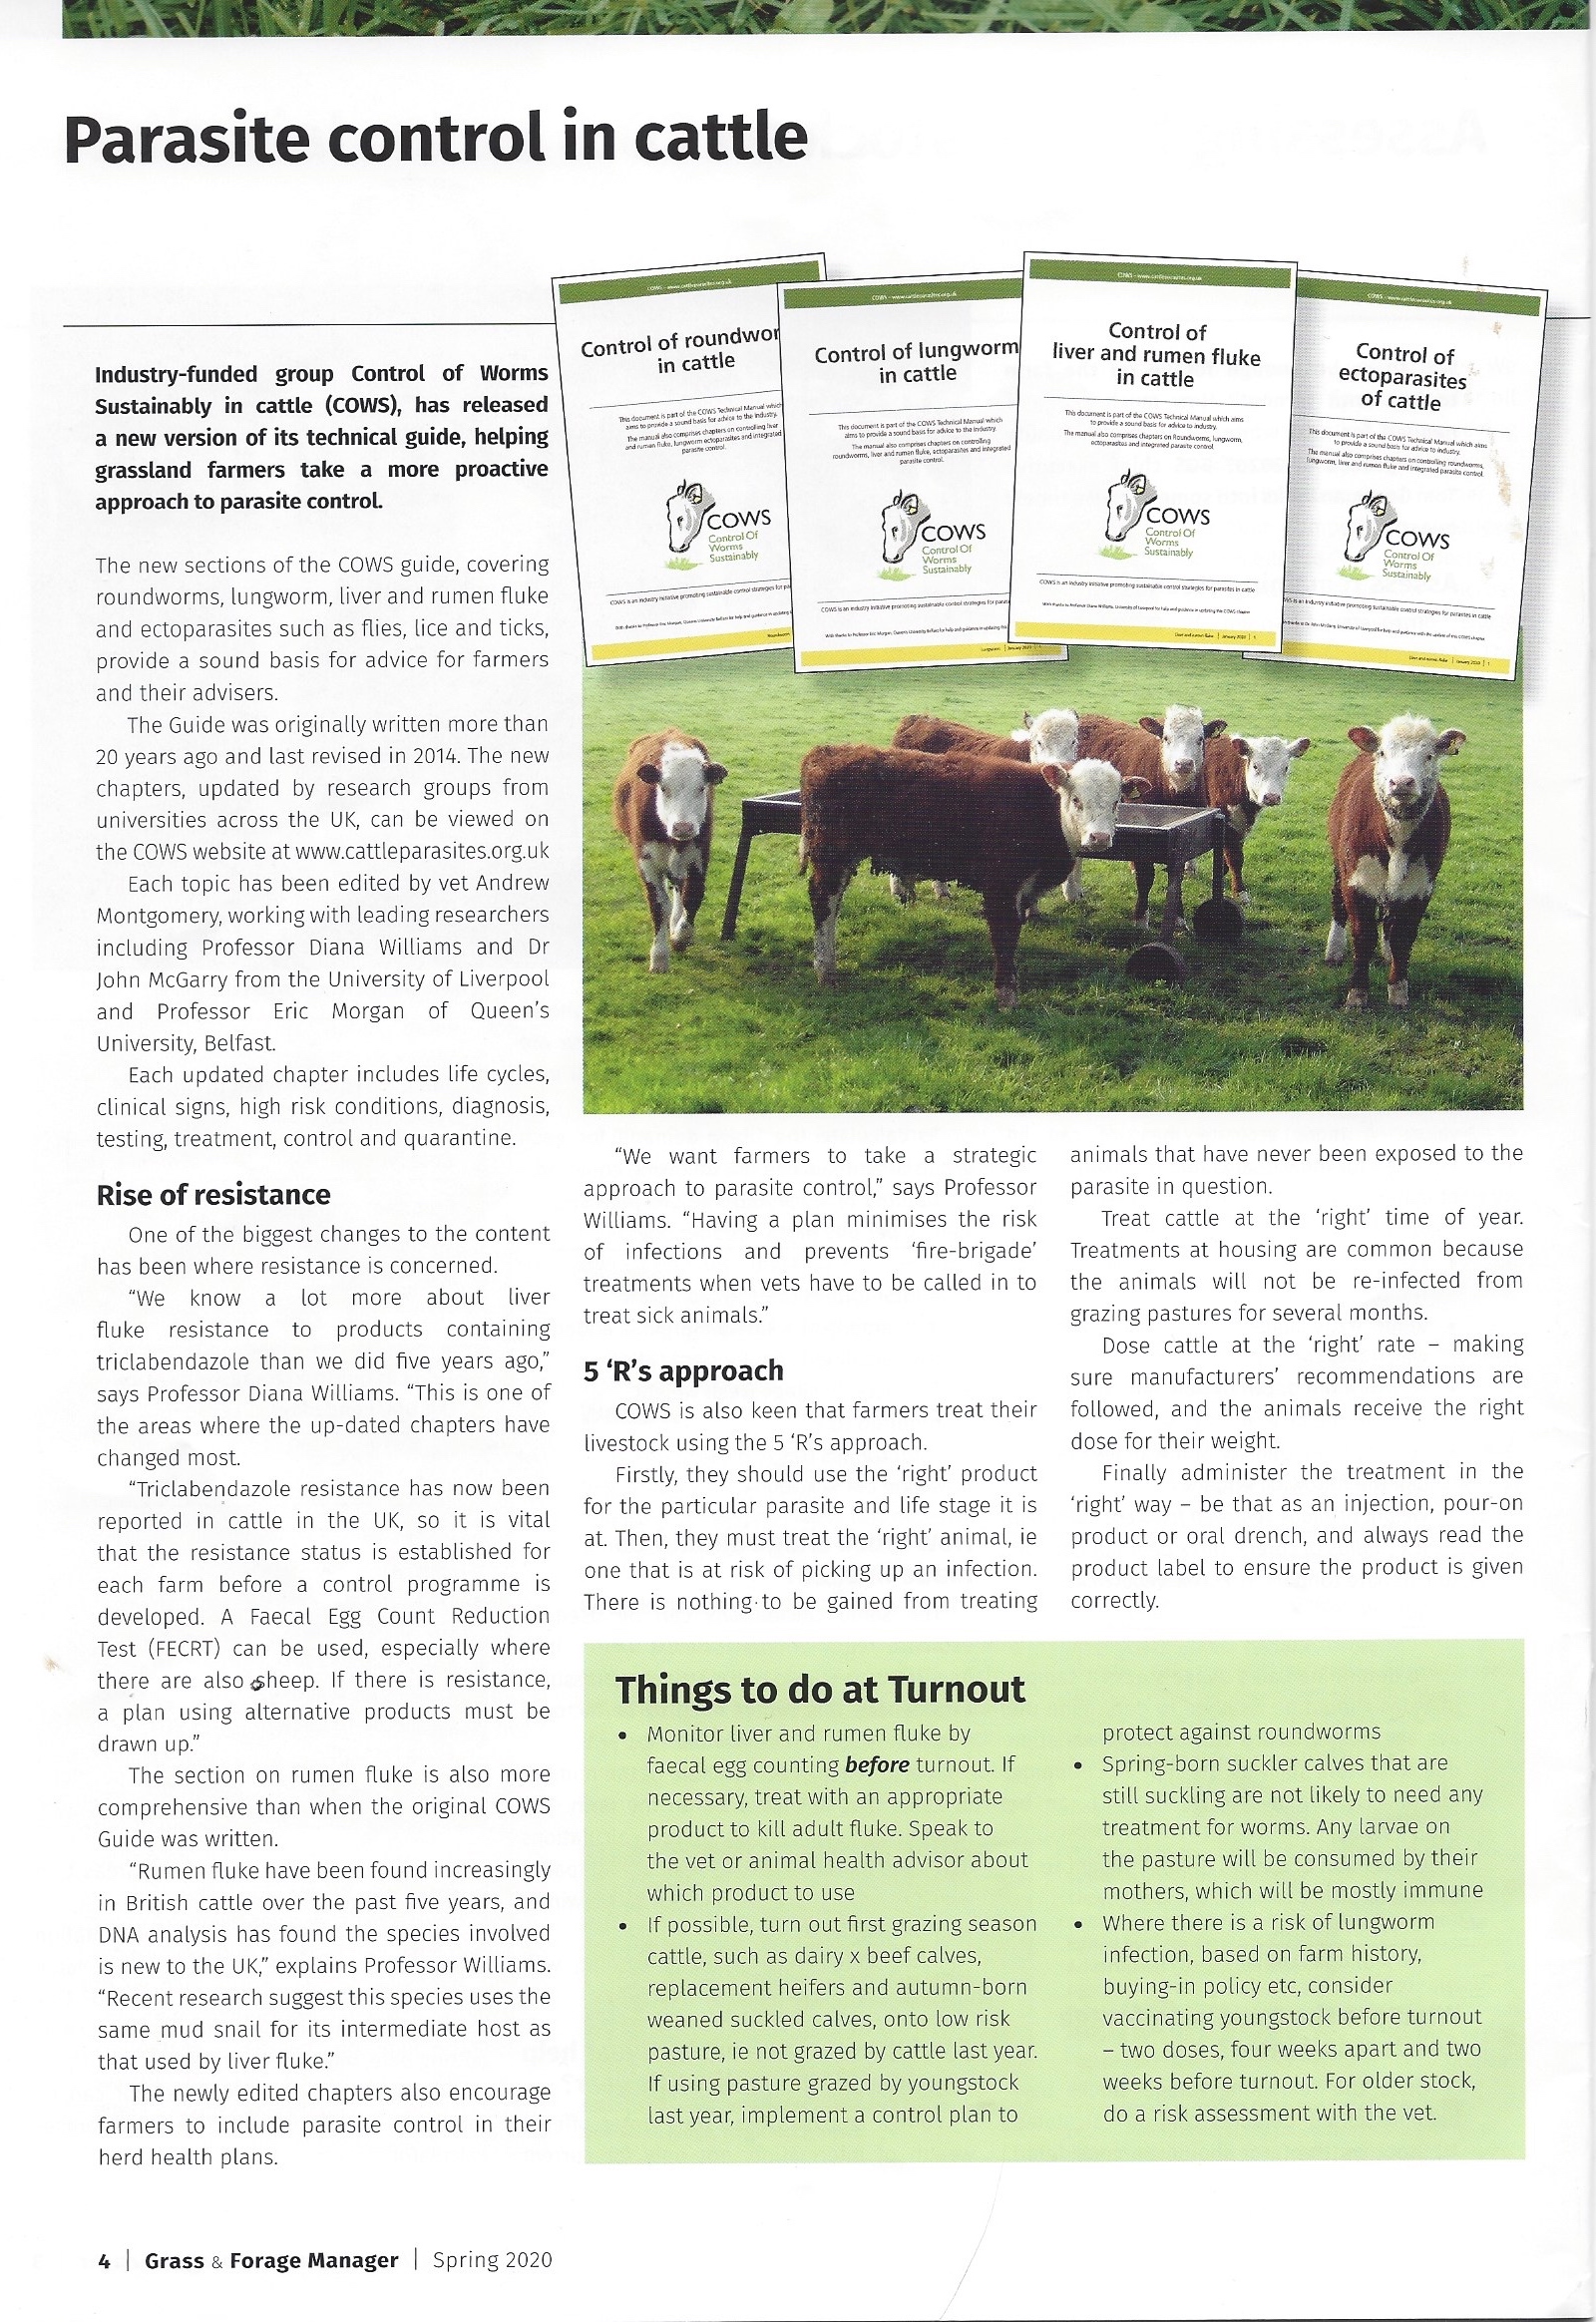 "Parasite control in cattle" from the Grass and Forage Manager, Spring 2020 edition